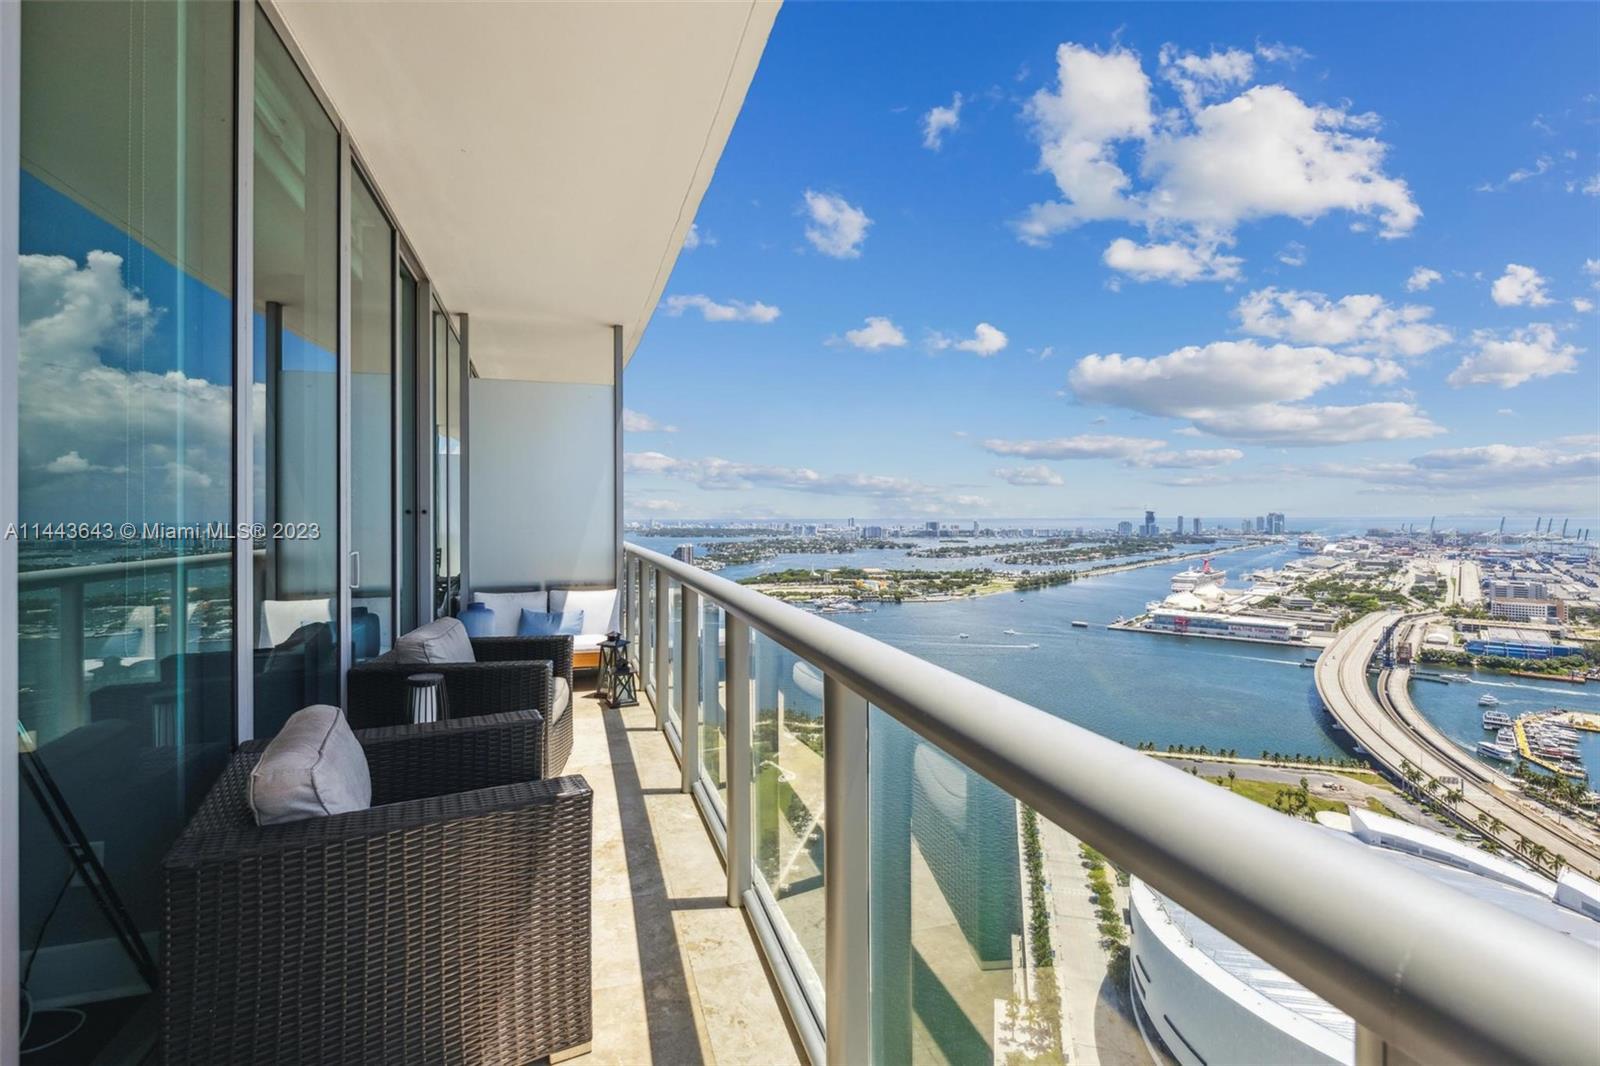 The best deal for the 2 bedroom in the building. Enjoy front row seats to Miami’s fireworks display 